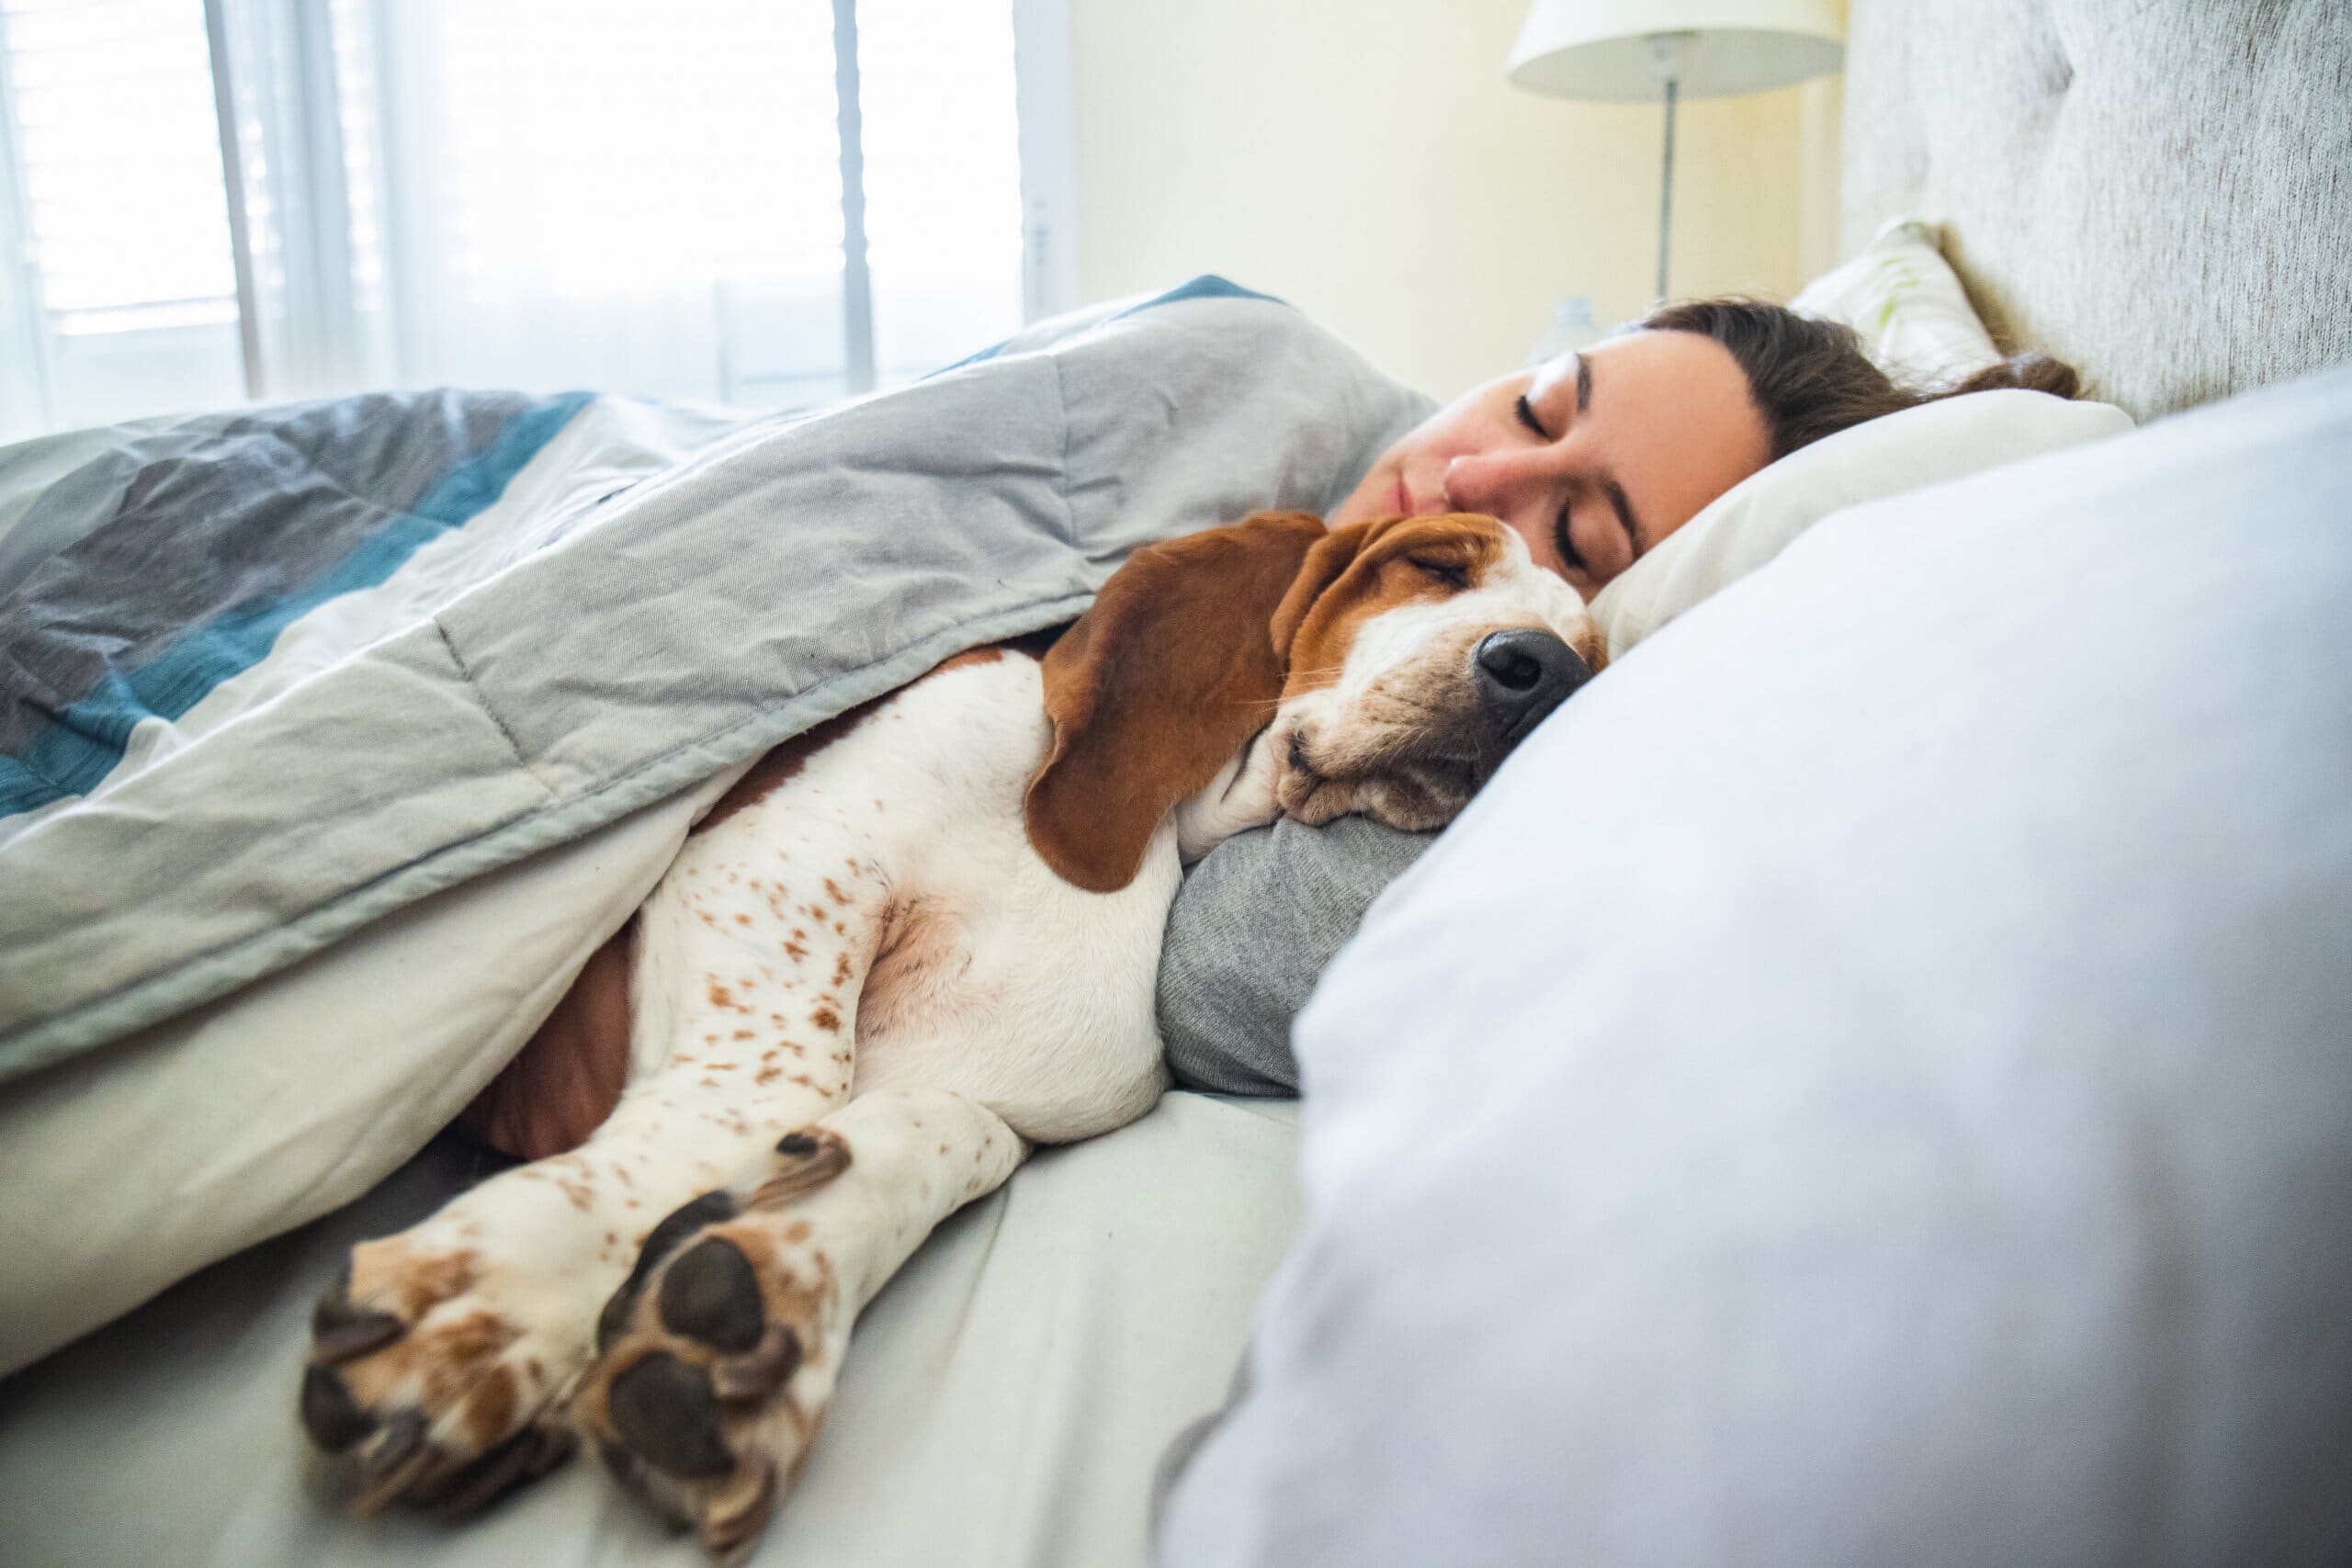 Image of a basset hound sleeping in bed next to a women, both under the covers with their heads on the pillow.